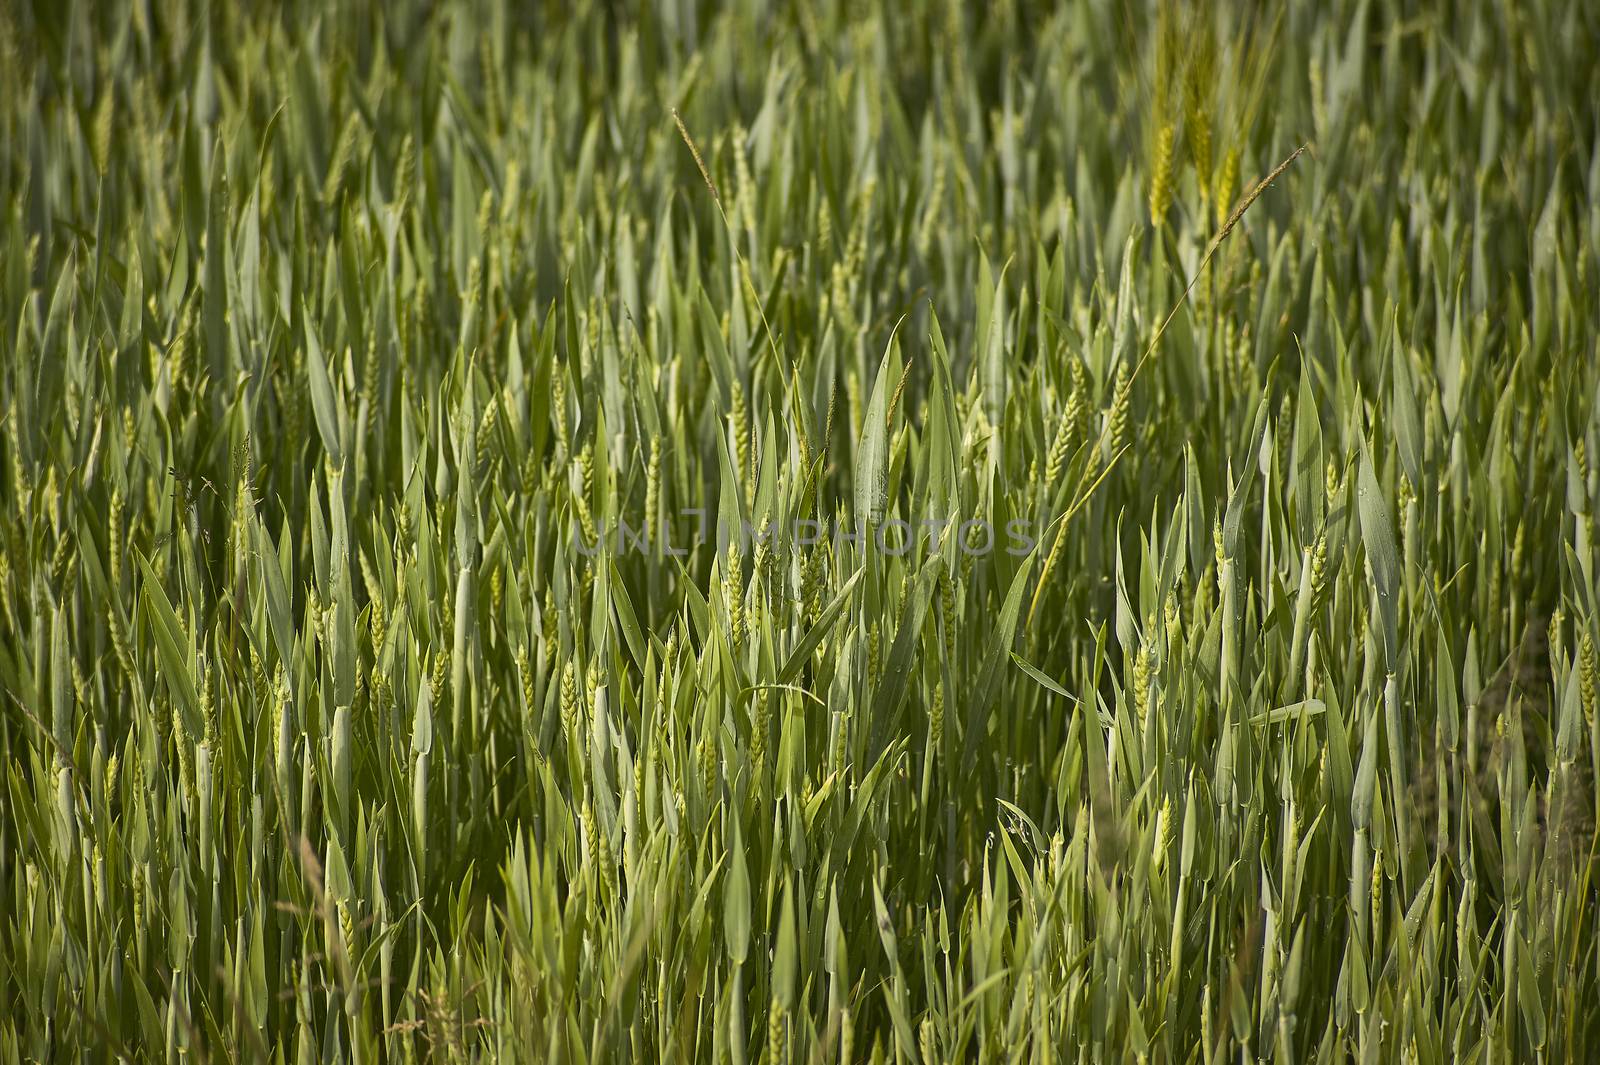 Texture of a field of barley by pippocarlot